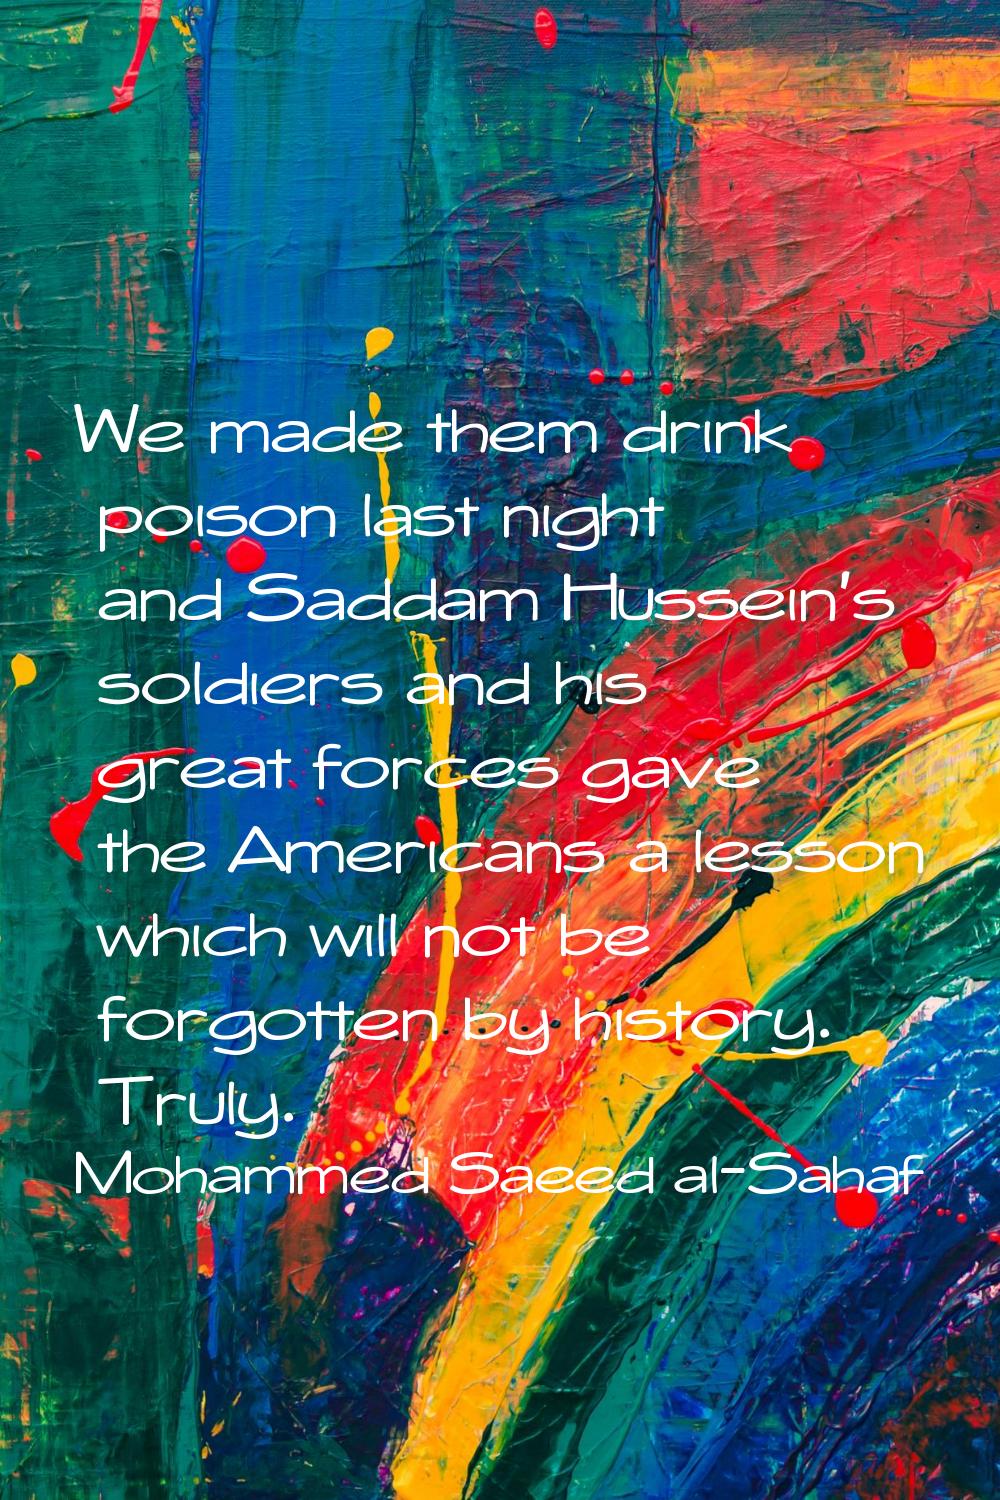 We made them drink poison last night and Saddam Hussein's soldiers and his great forces gave the Am